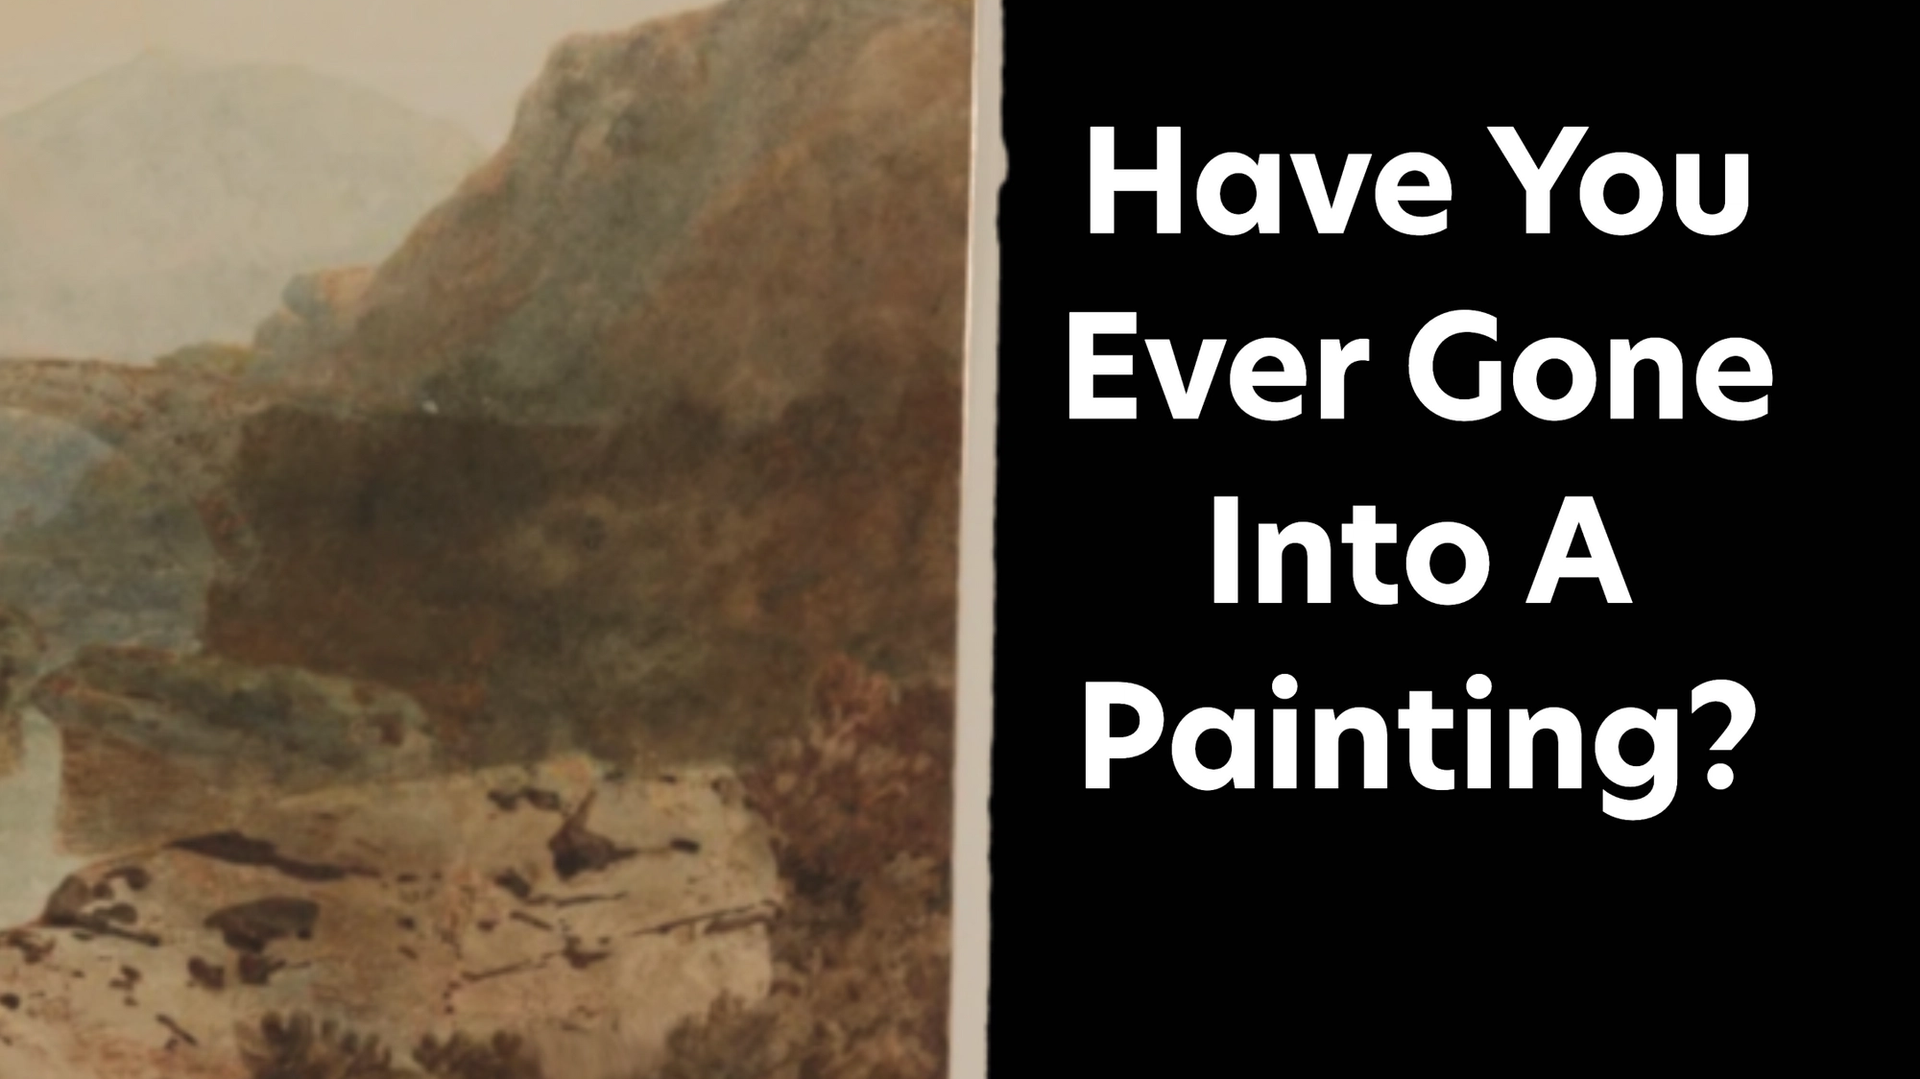 Have You Ever Gone Into A Painting?